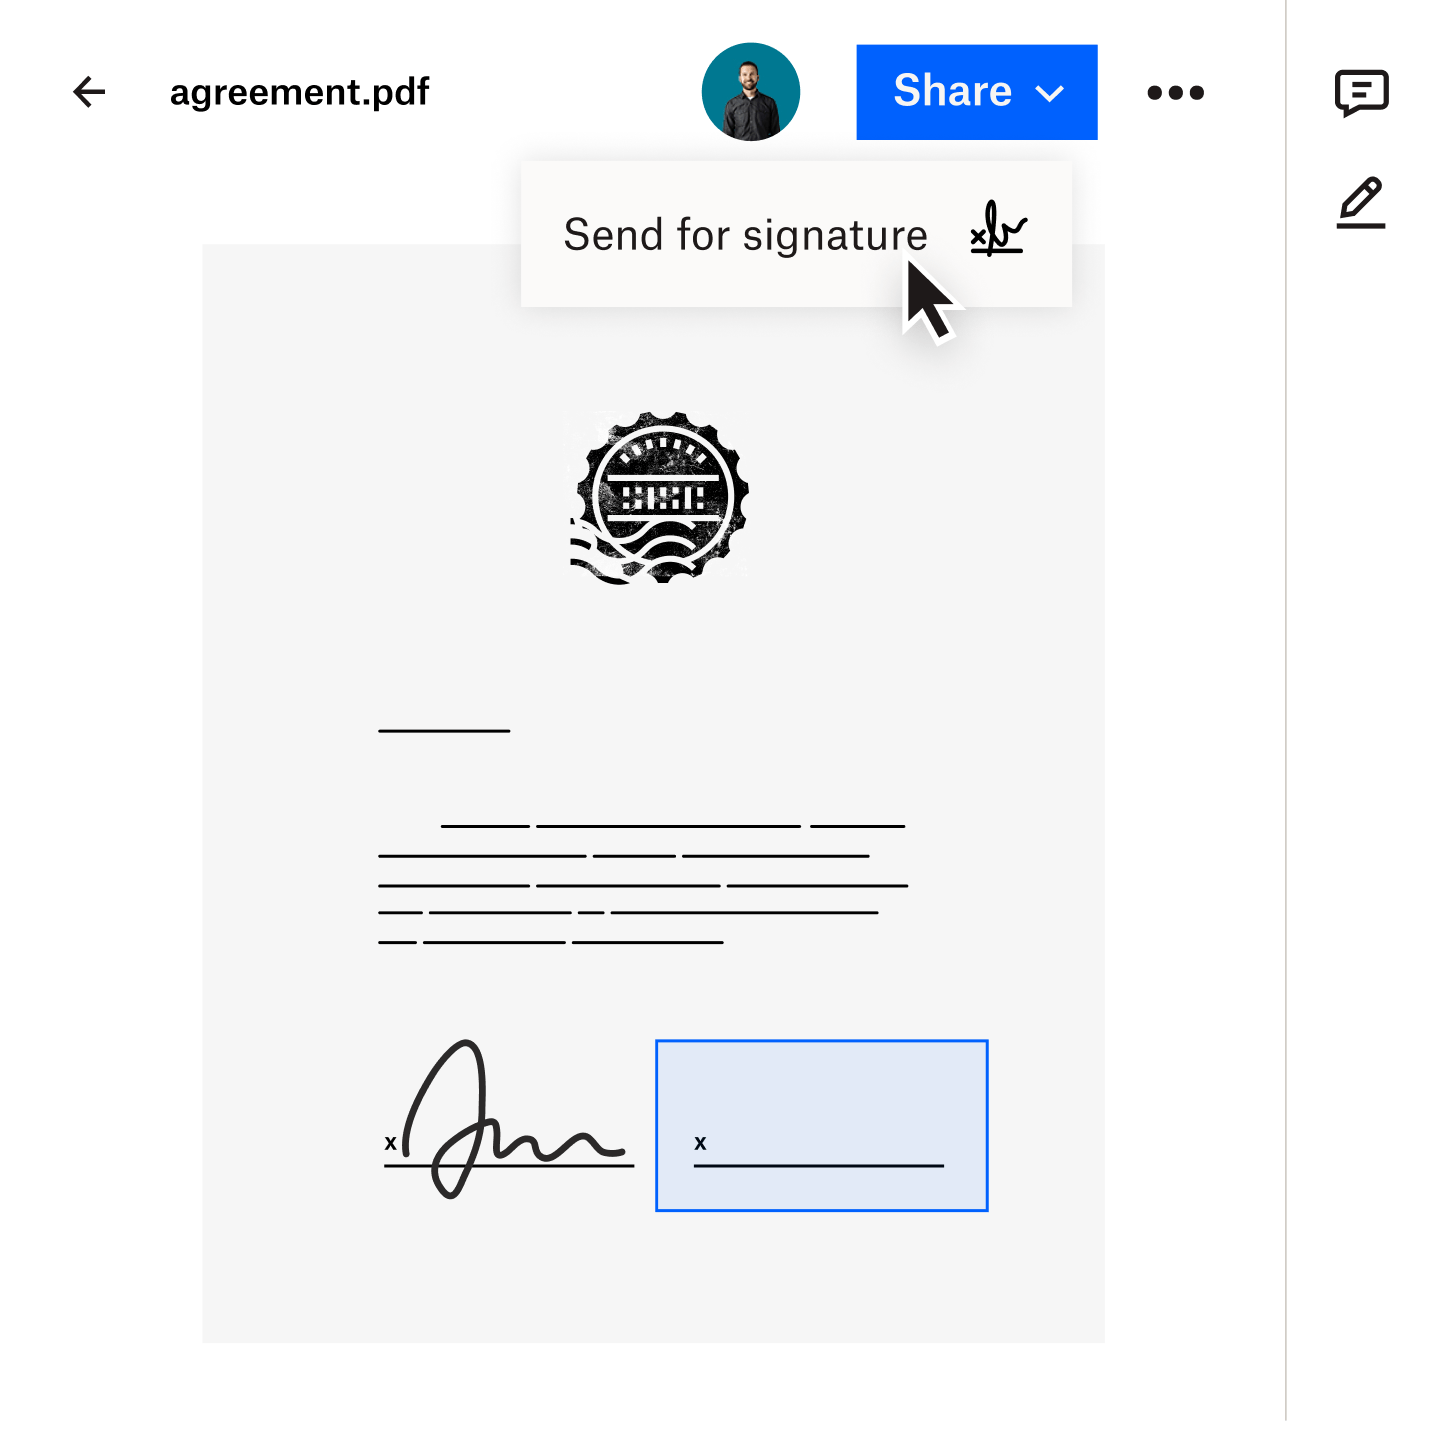 An agreement saved in Dropbox is easily sent for a legally binding eSignature